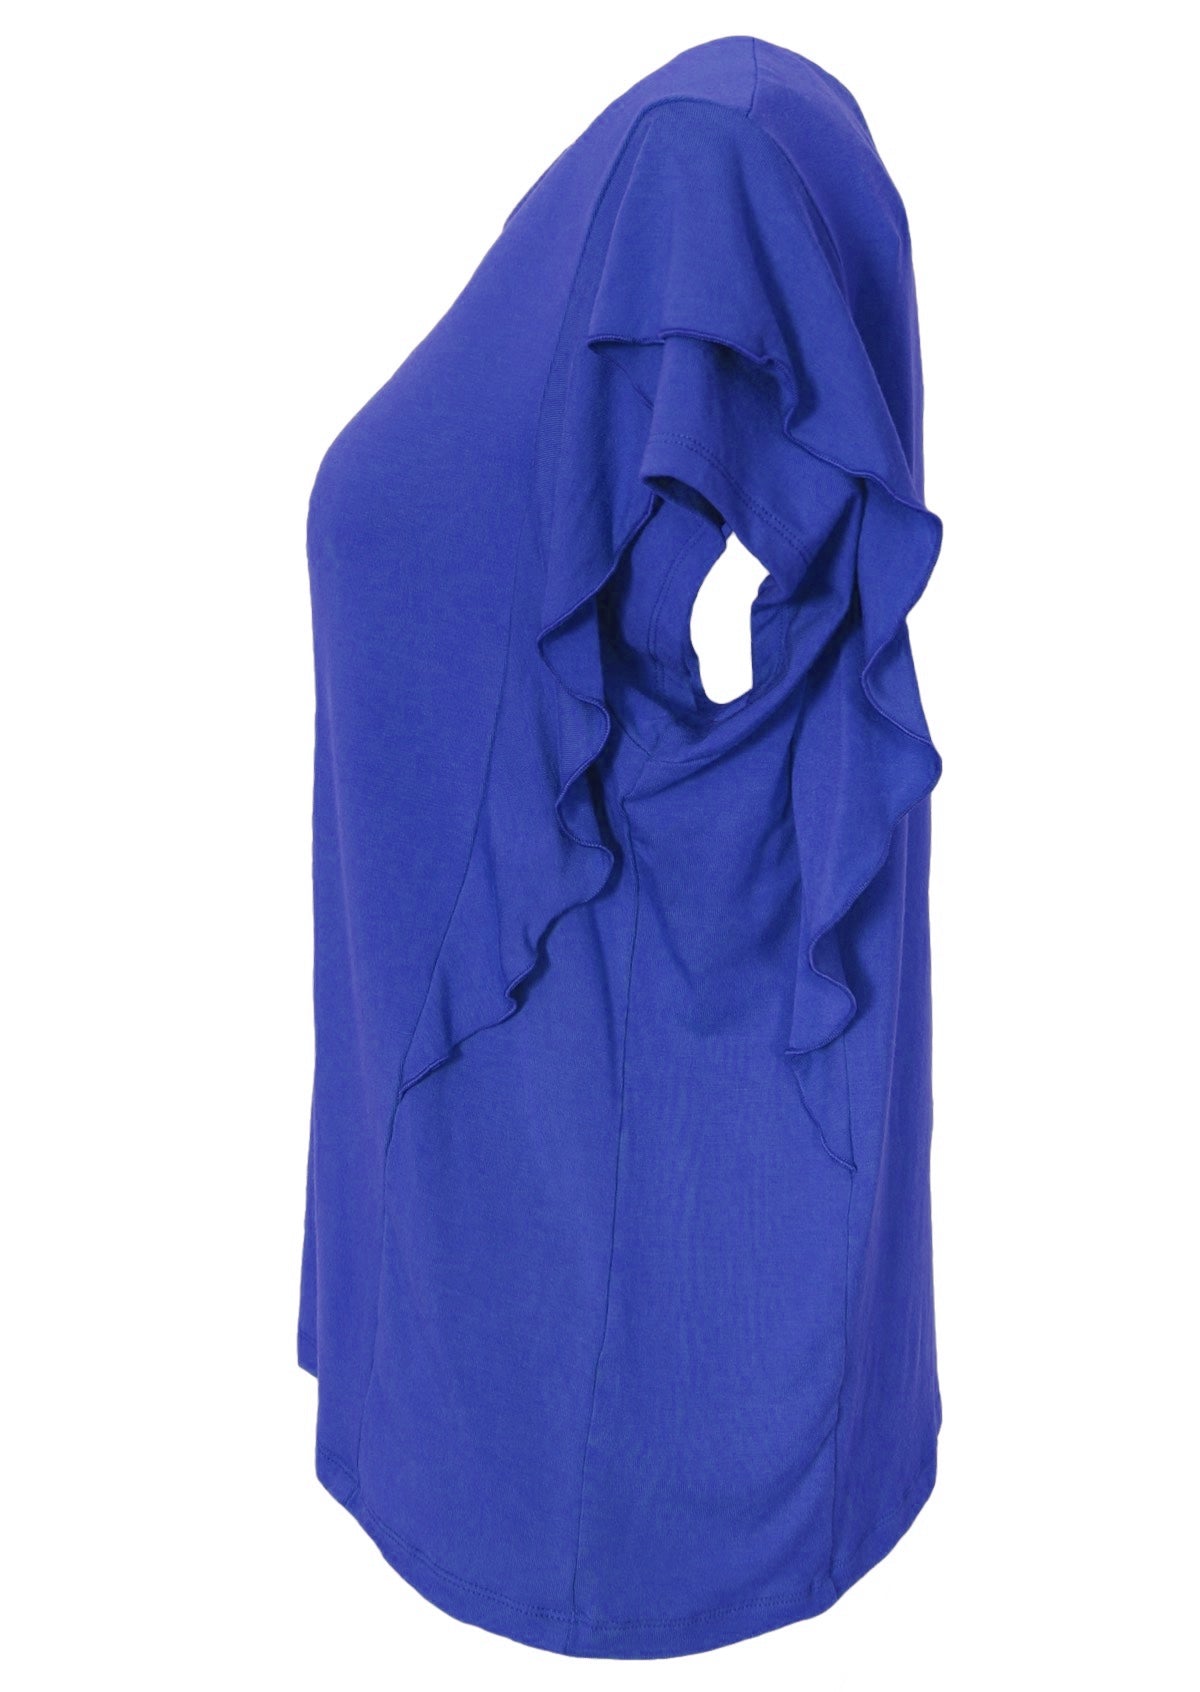 Side view blue ruffle over shoulder top.